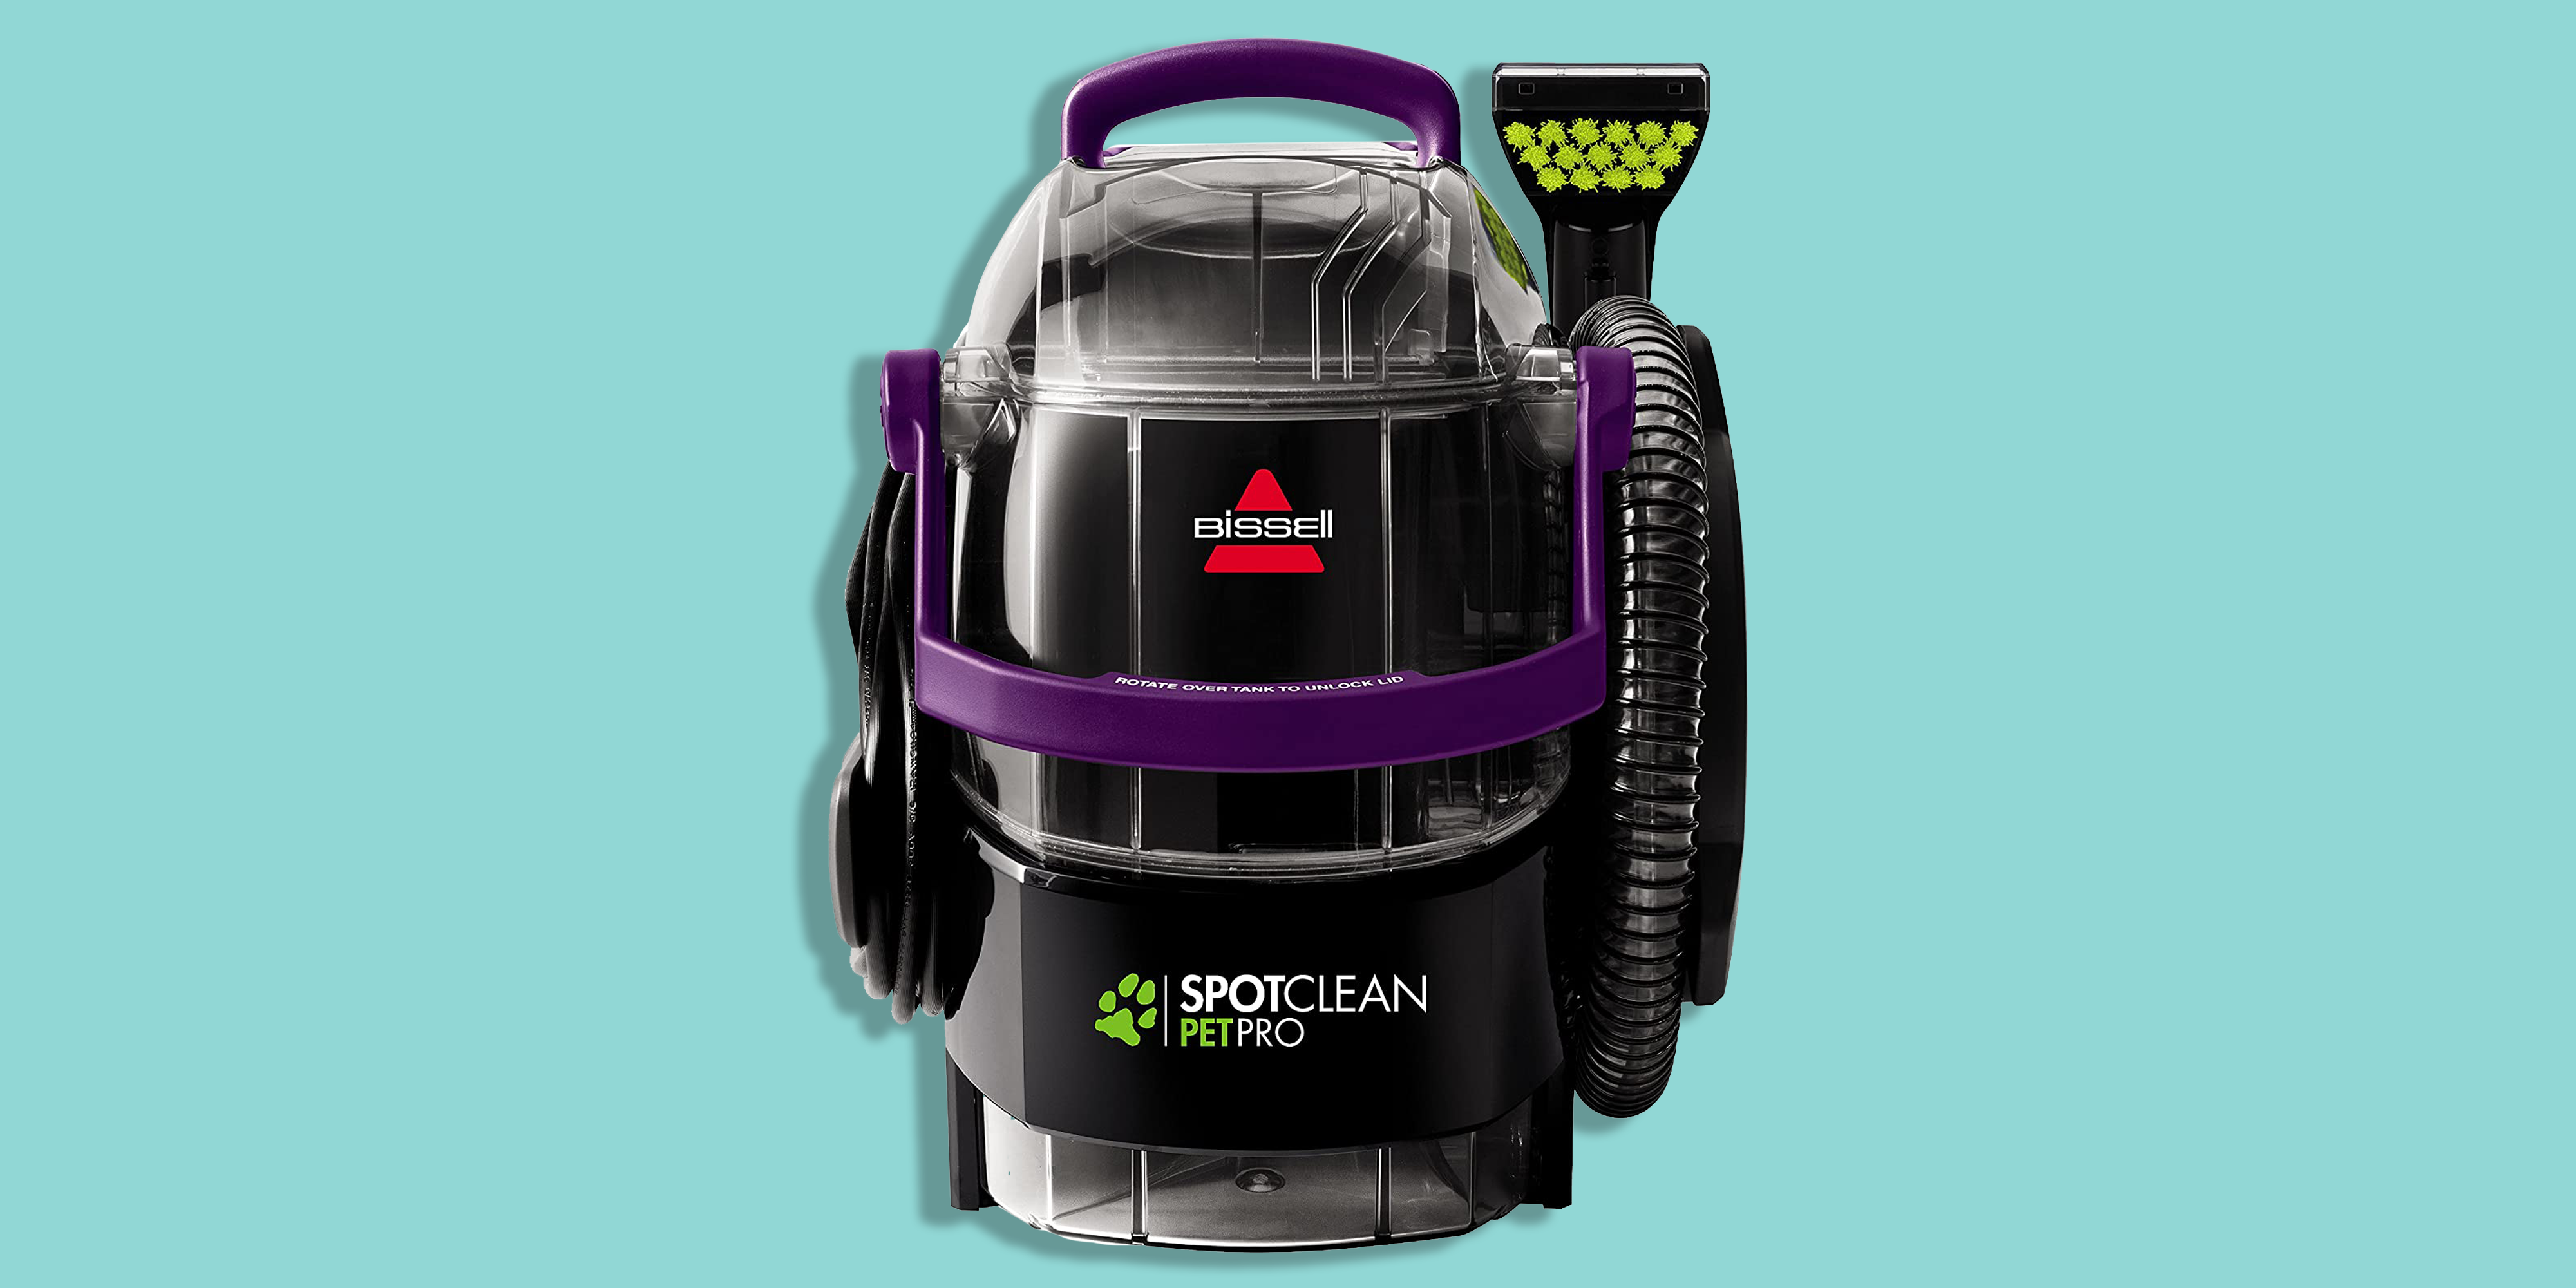 The 8 best carpet cleaners, according to experts